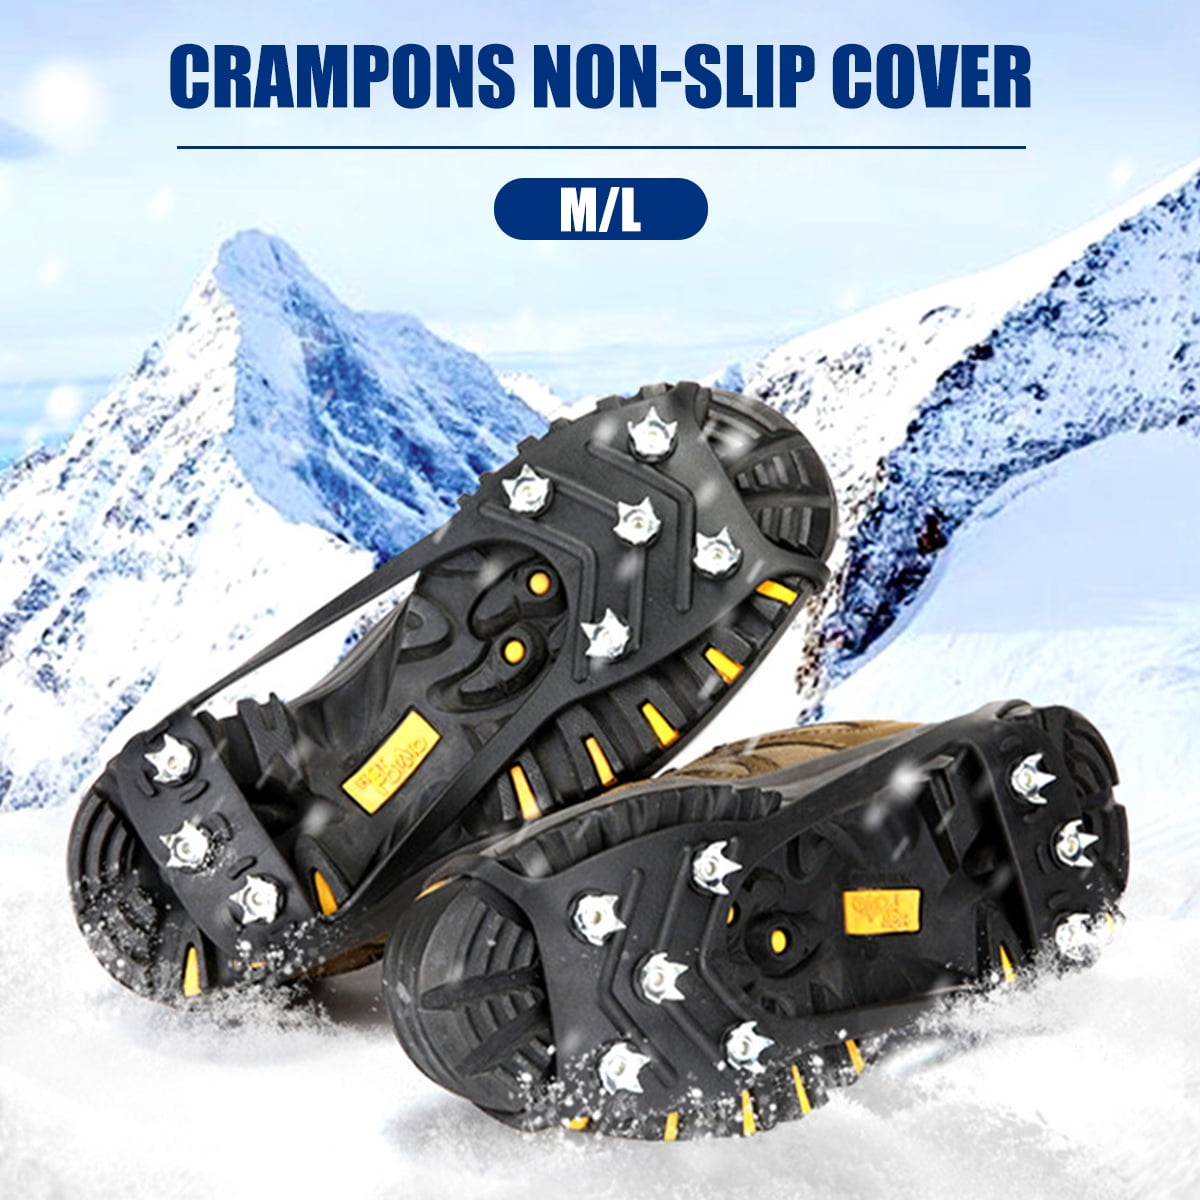 1 PAIR ICE SNOW CLIMBING WALKING BOOT SHOE COVER SPIKE CLEATS CRAMPONS 